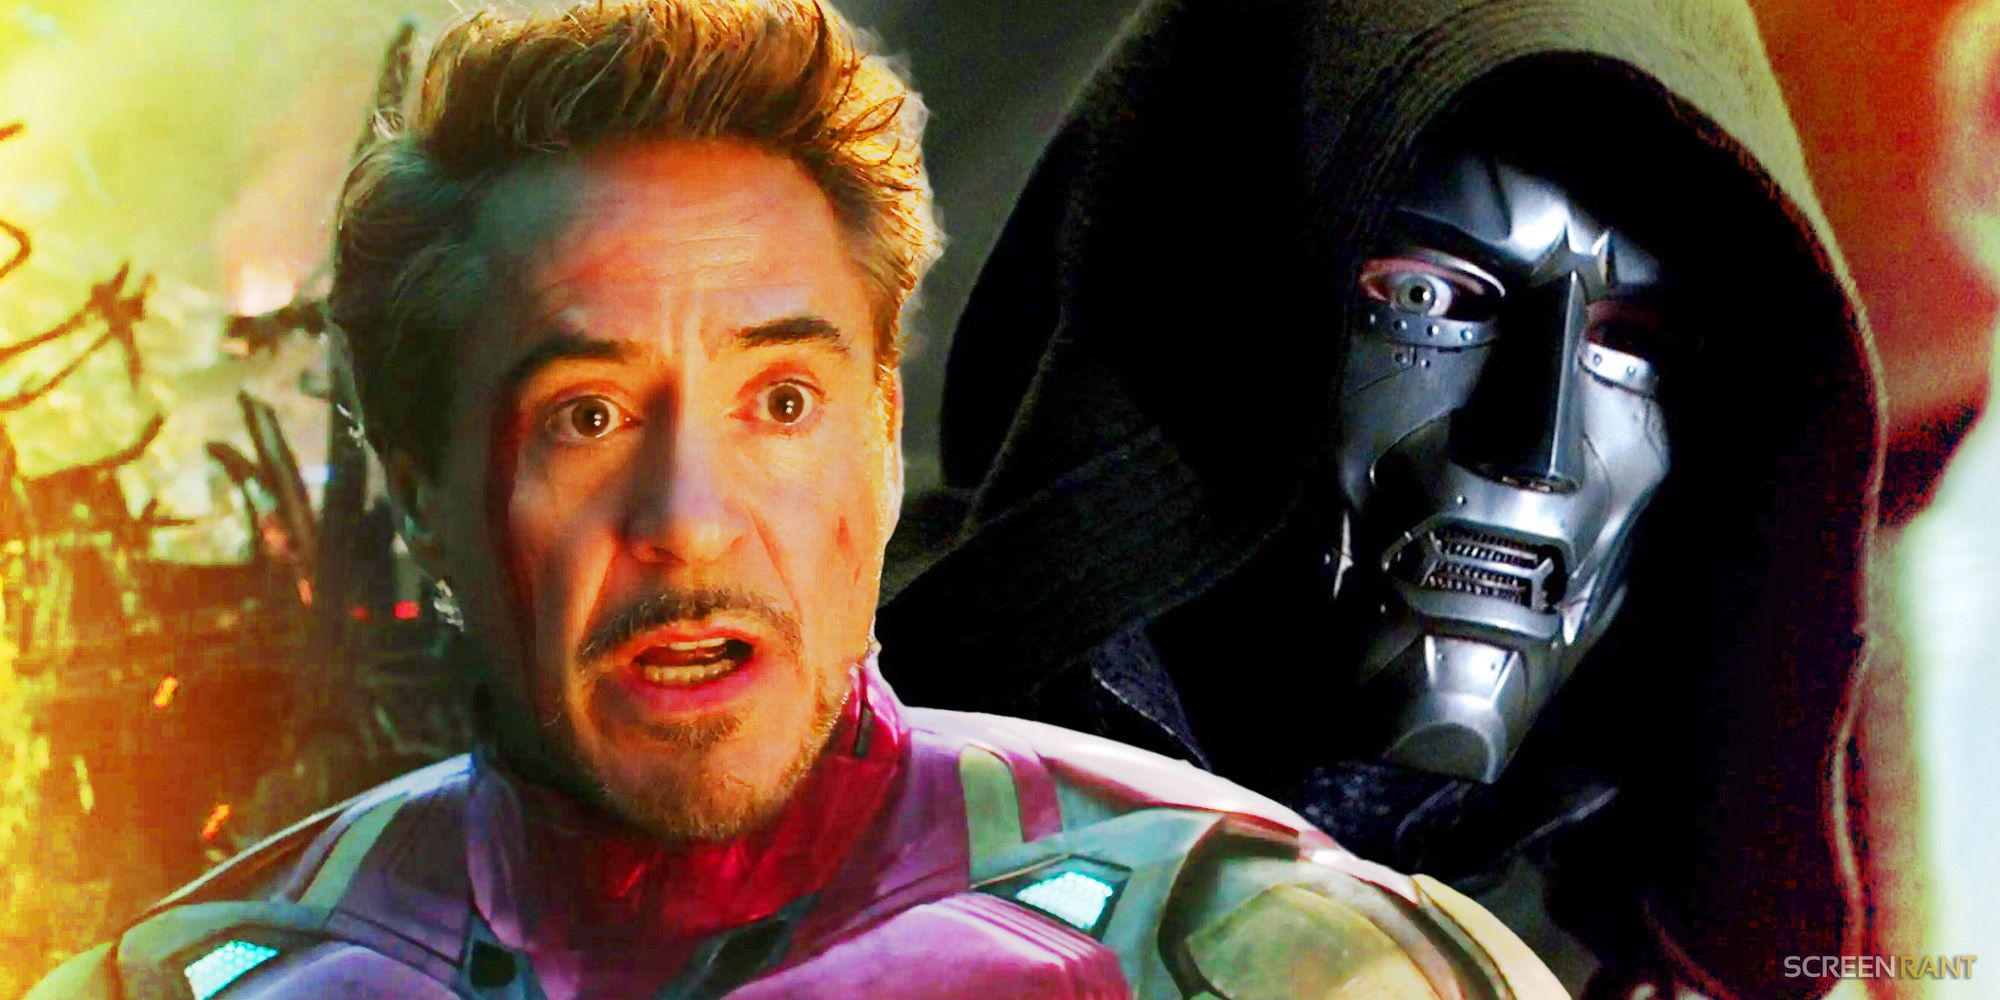 RDJ unmasked in the Iron Man armor from Avengers: Endgame and Doctor Doom from 2005's Fantastic Four movie